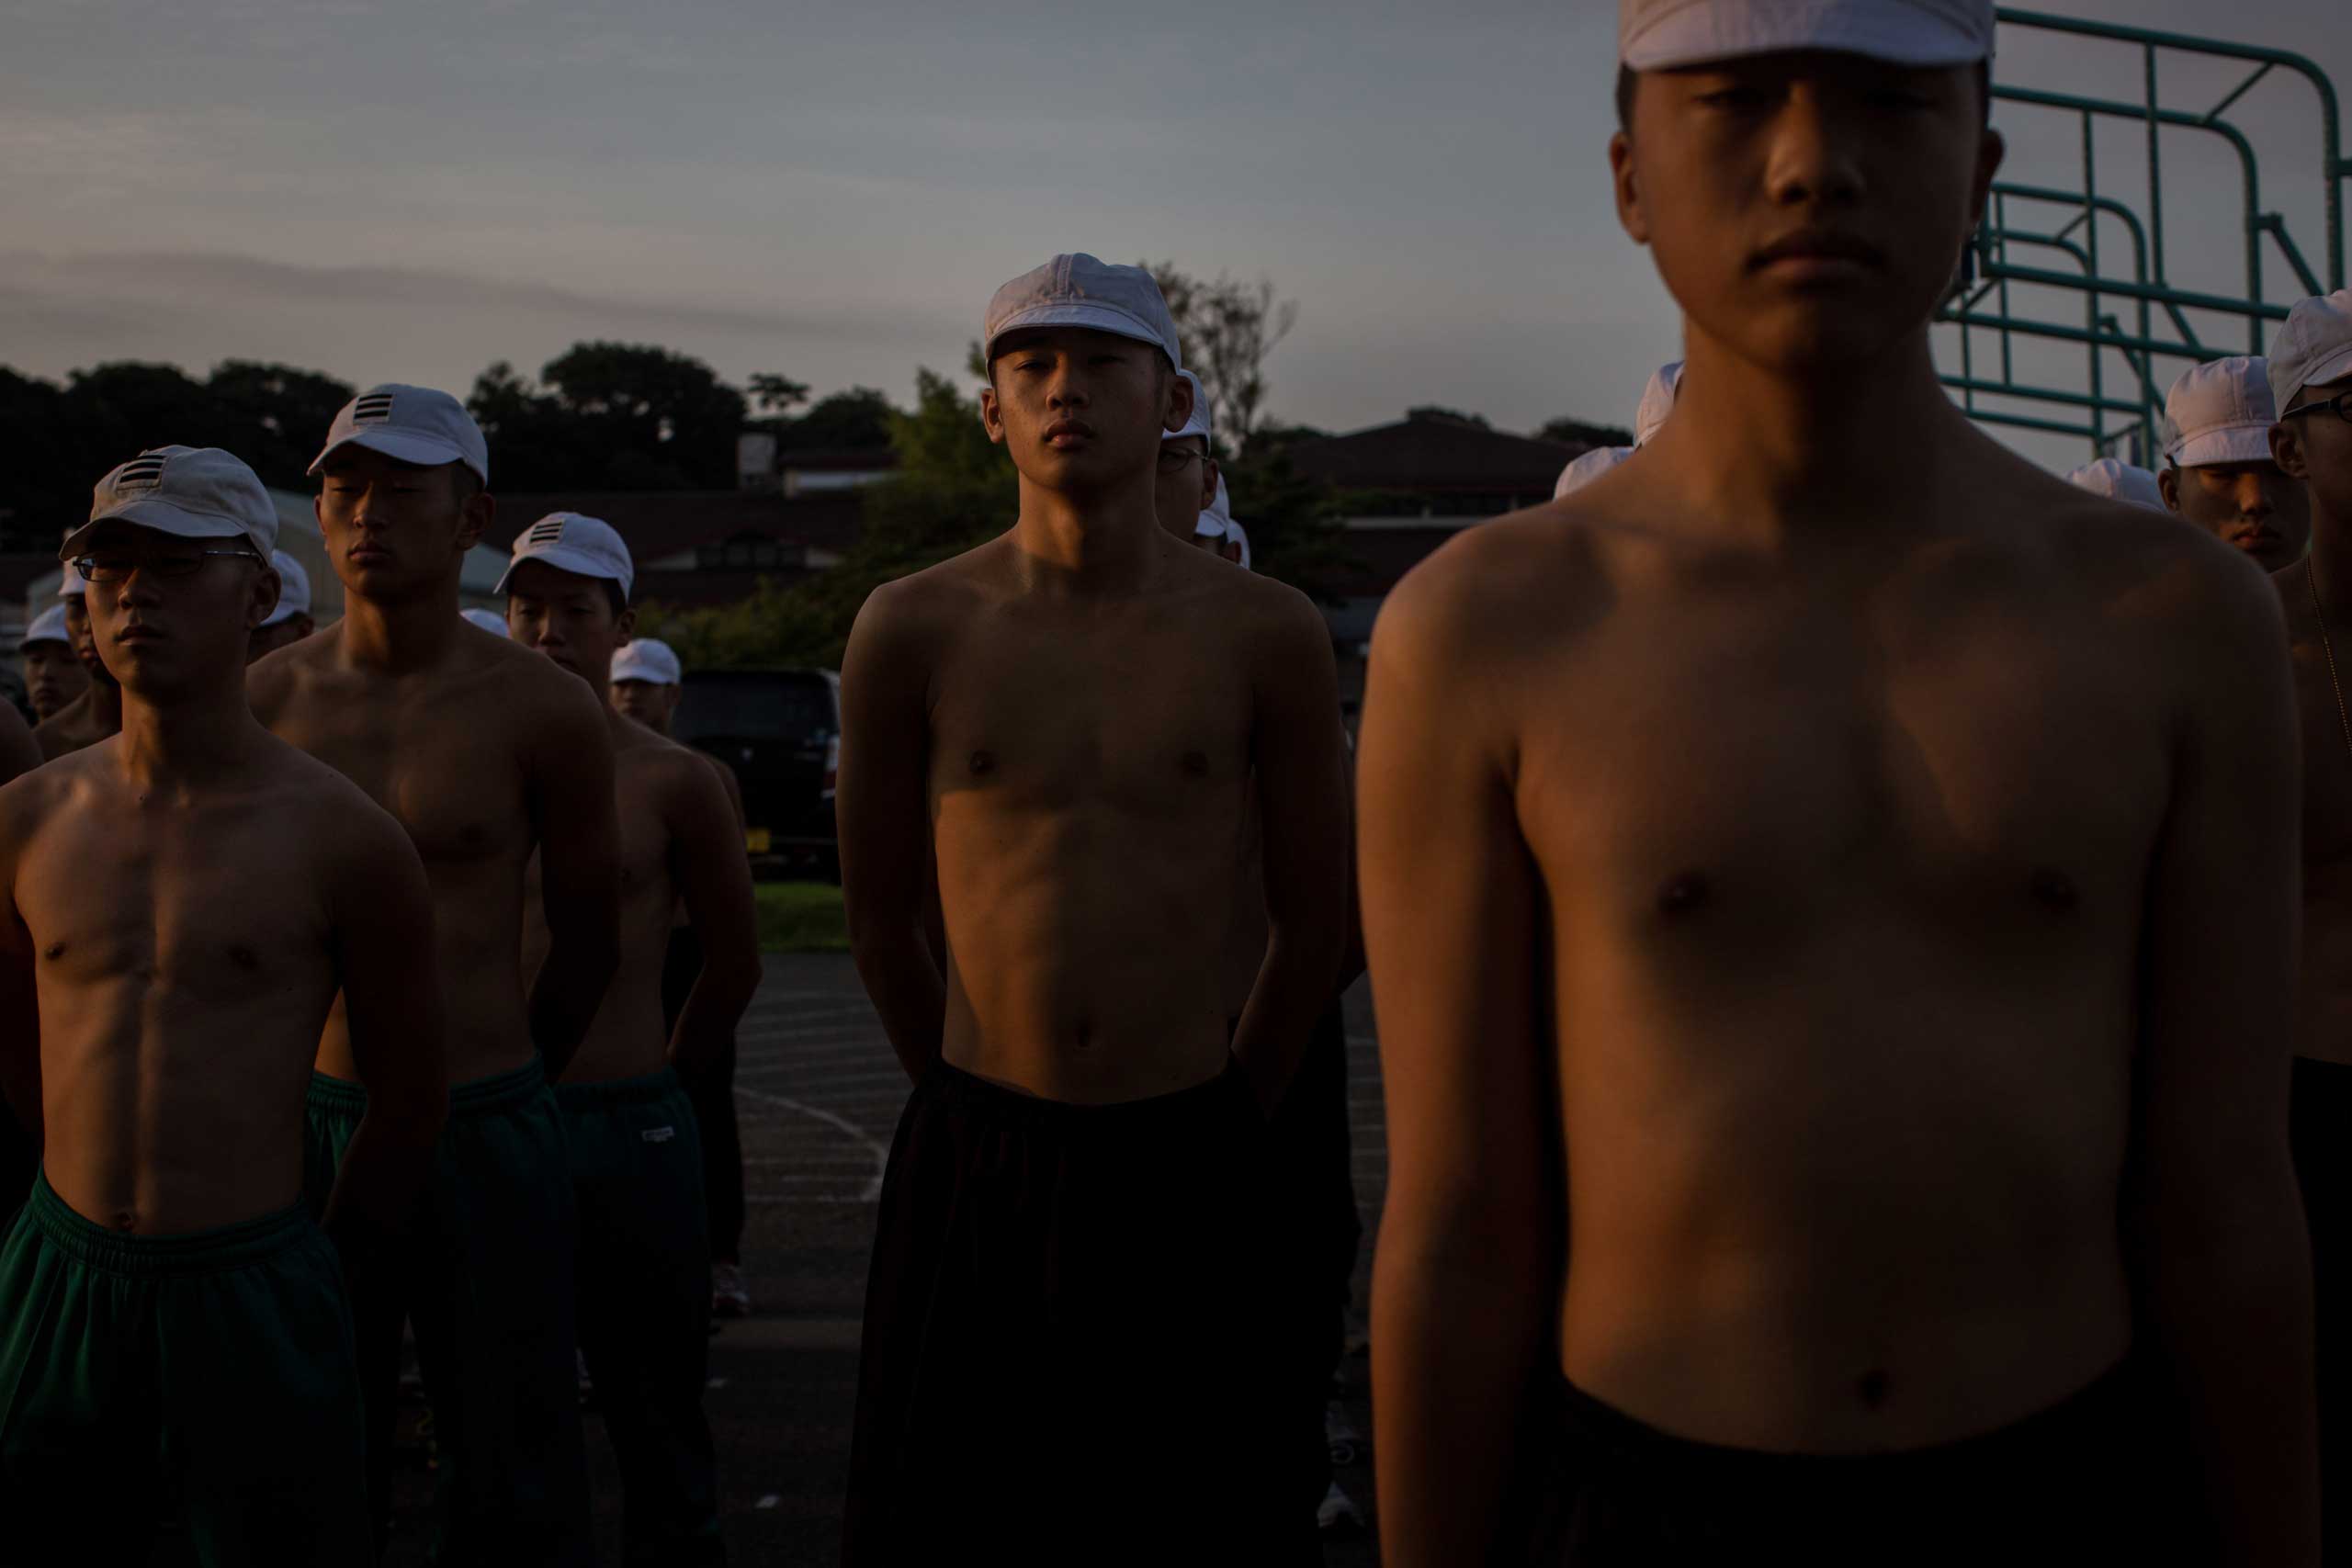 Sept. 17, 2014. First grade students assemble in the morning for a training schedule at the Japan Ground Self-Defense Force (JGSDF) High Technical School on in Yokosuka, Japan.